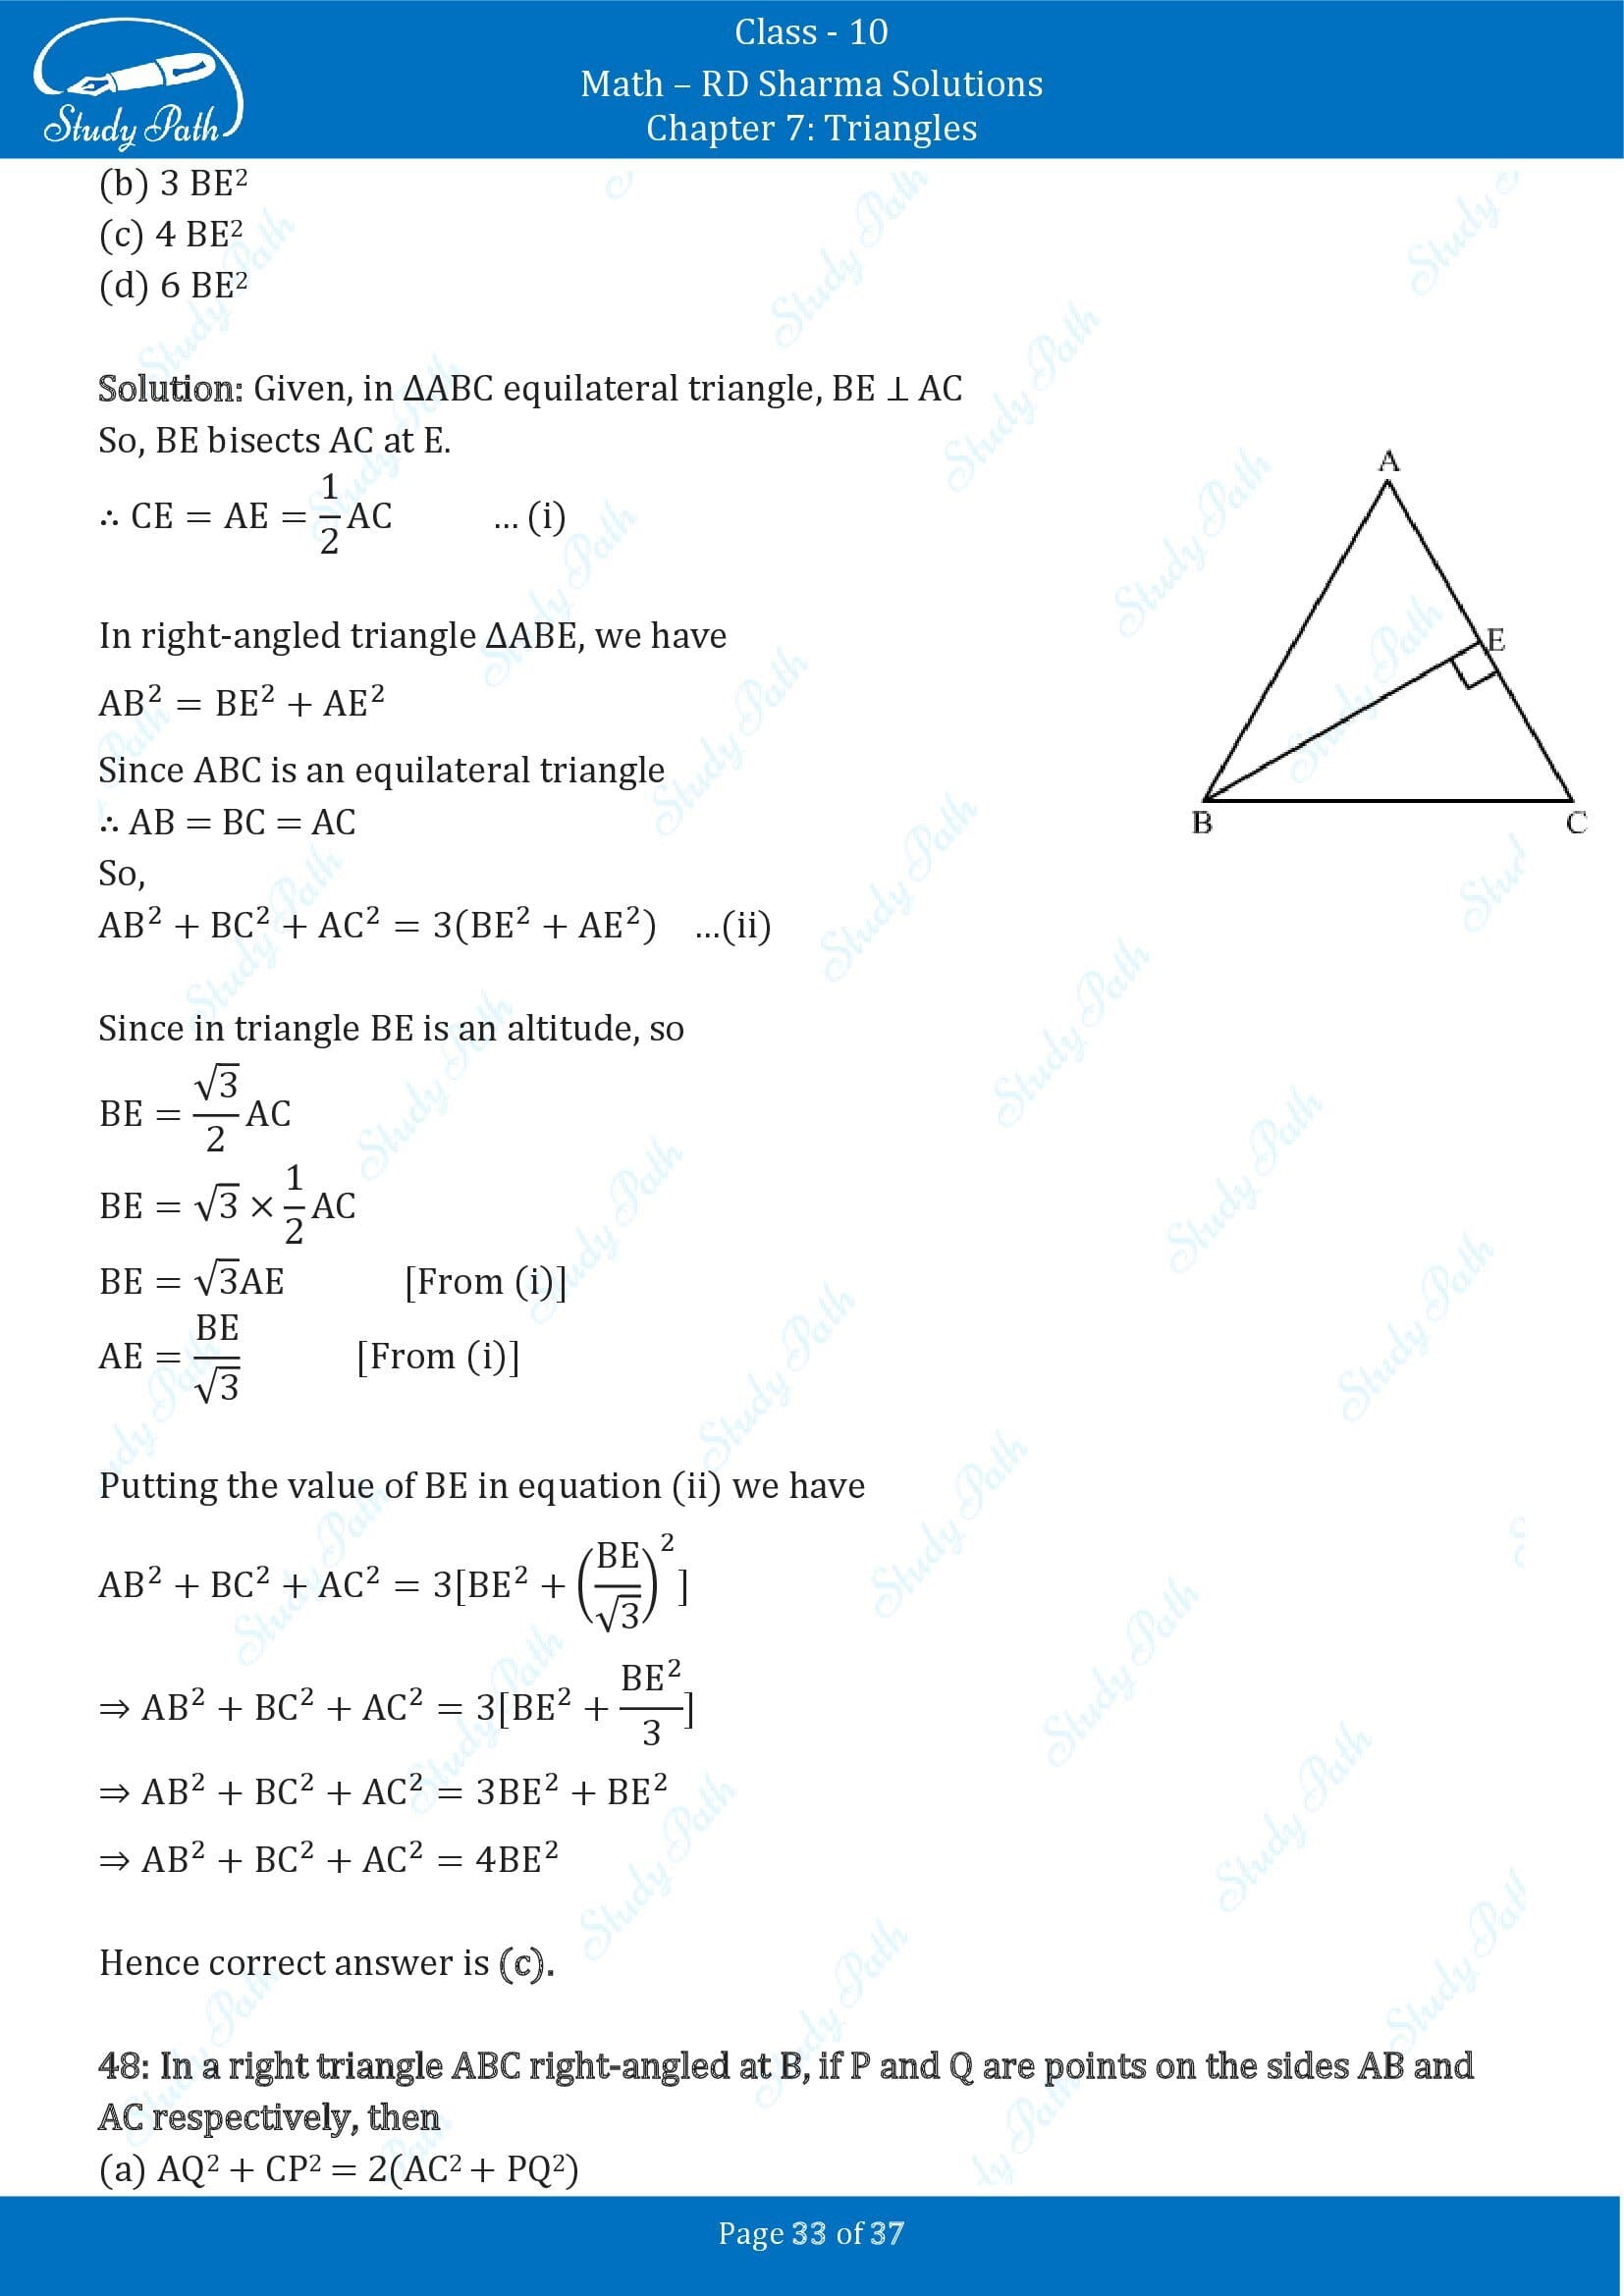 RD Sharma Solutions Class 10 Chapter 7 Triangles Multiple Choice Question MCQs 00033